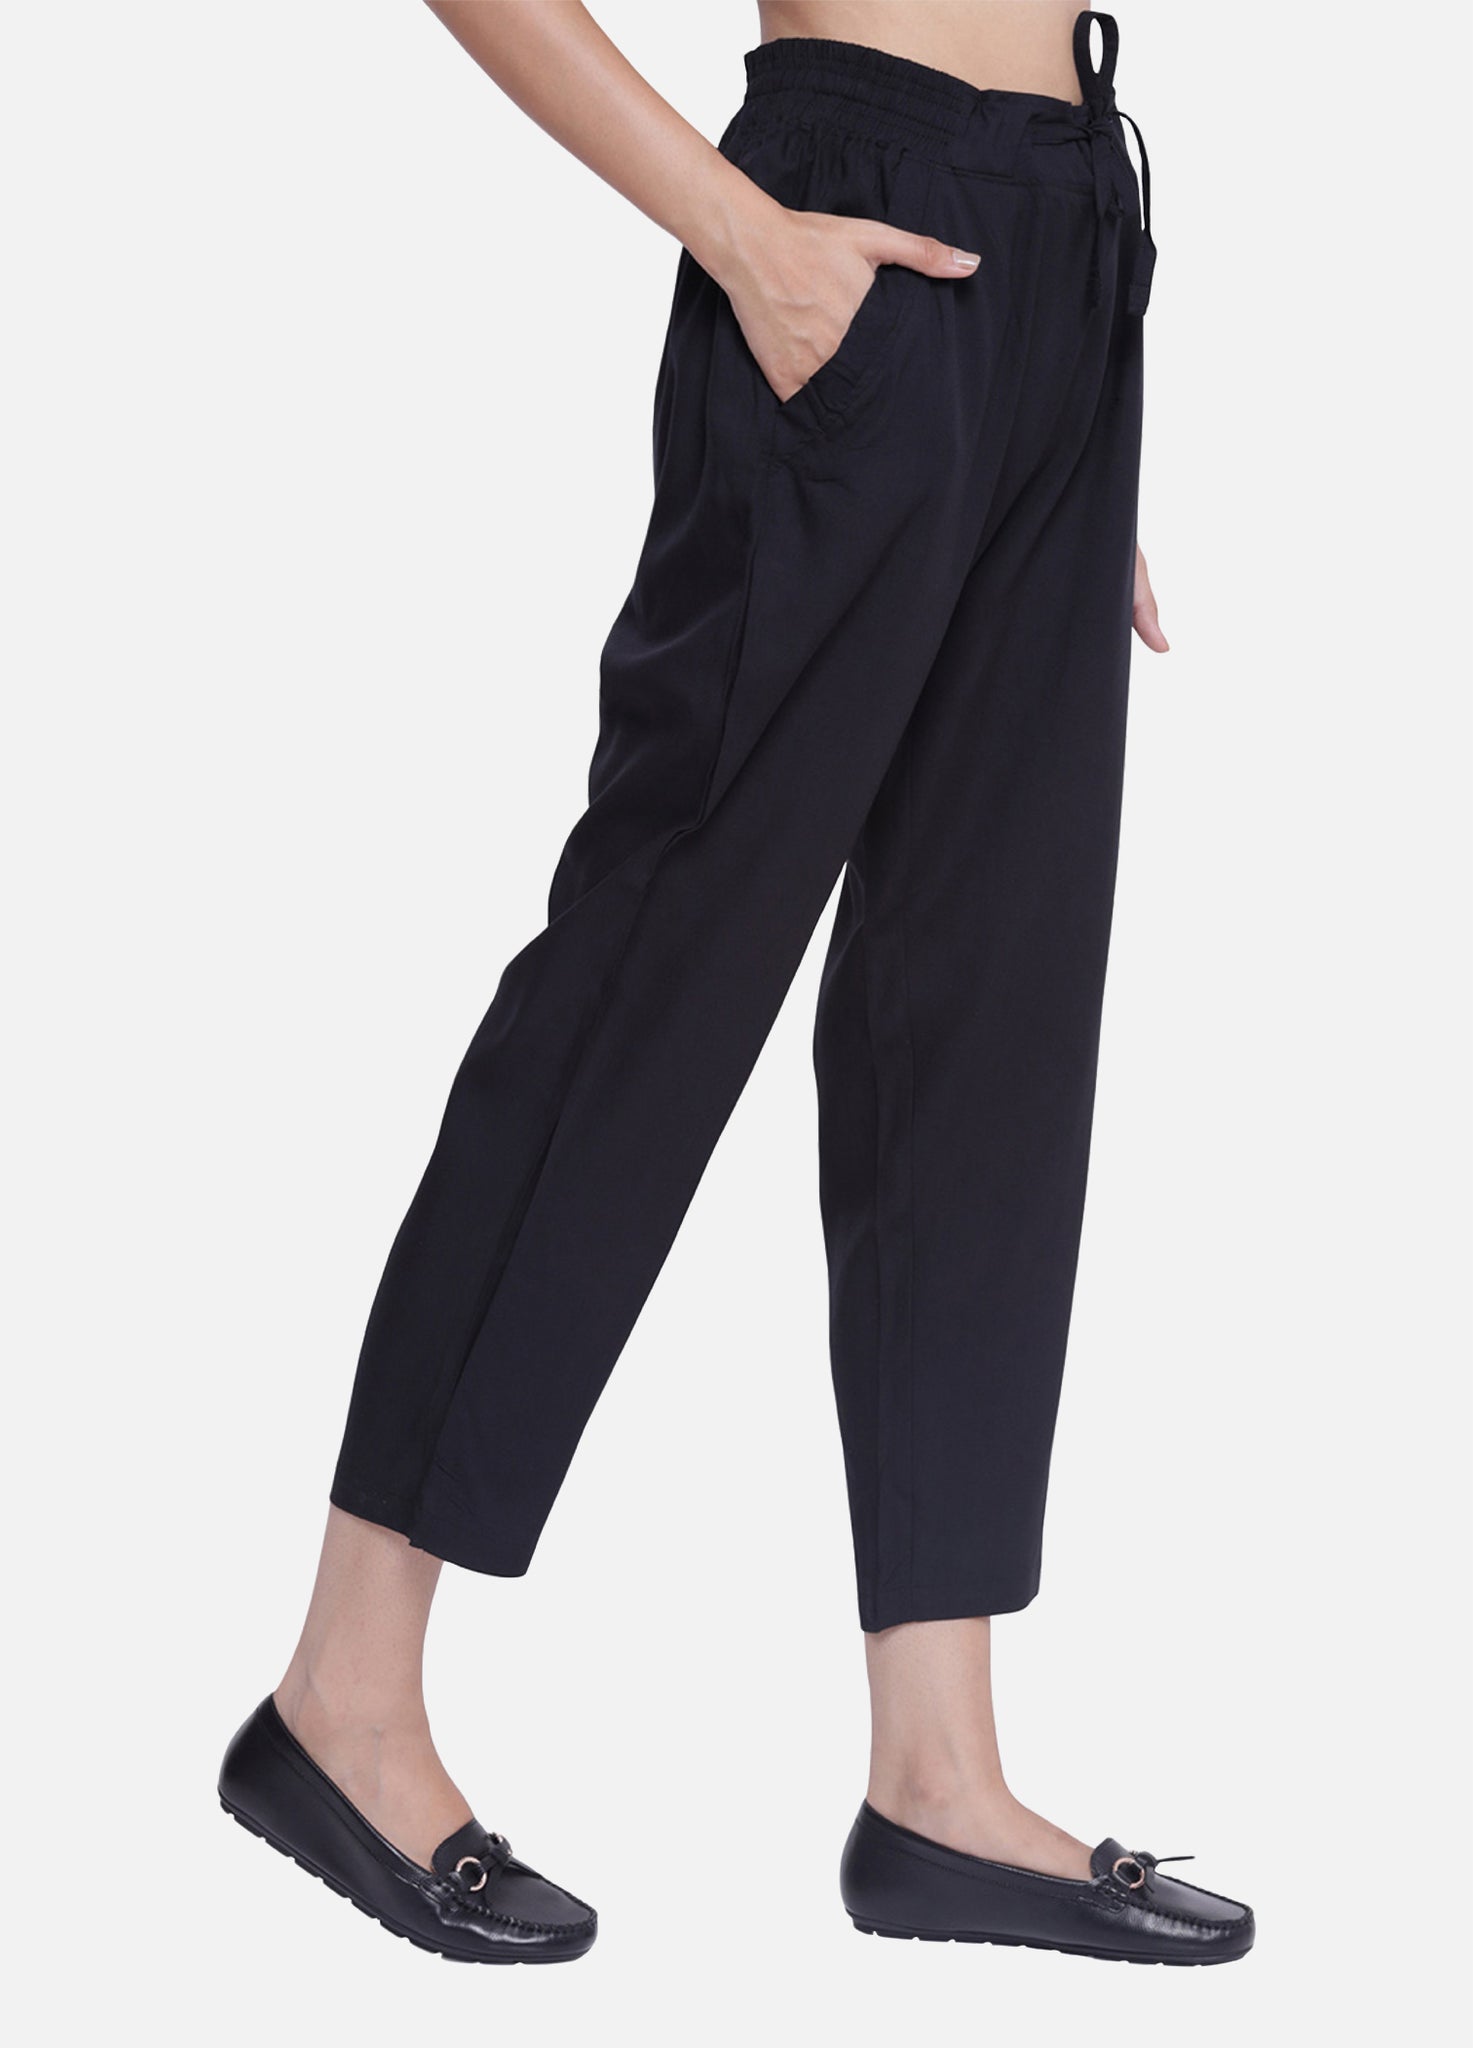 Women High-Waisted Cigarette Pants Work Office Casual Tapered Long Slim  Trousers | eBay